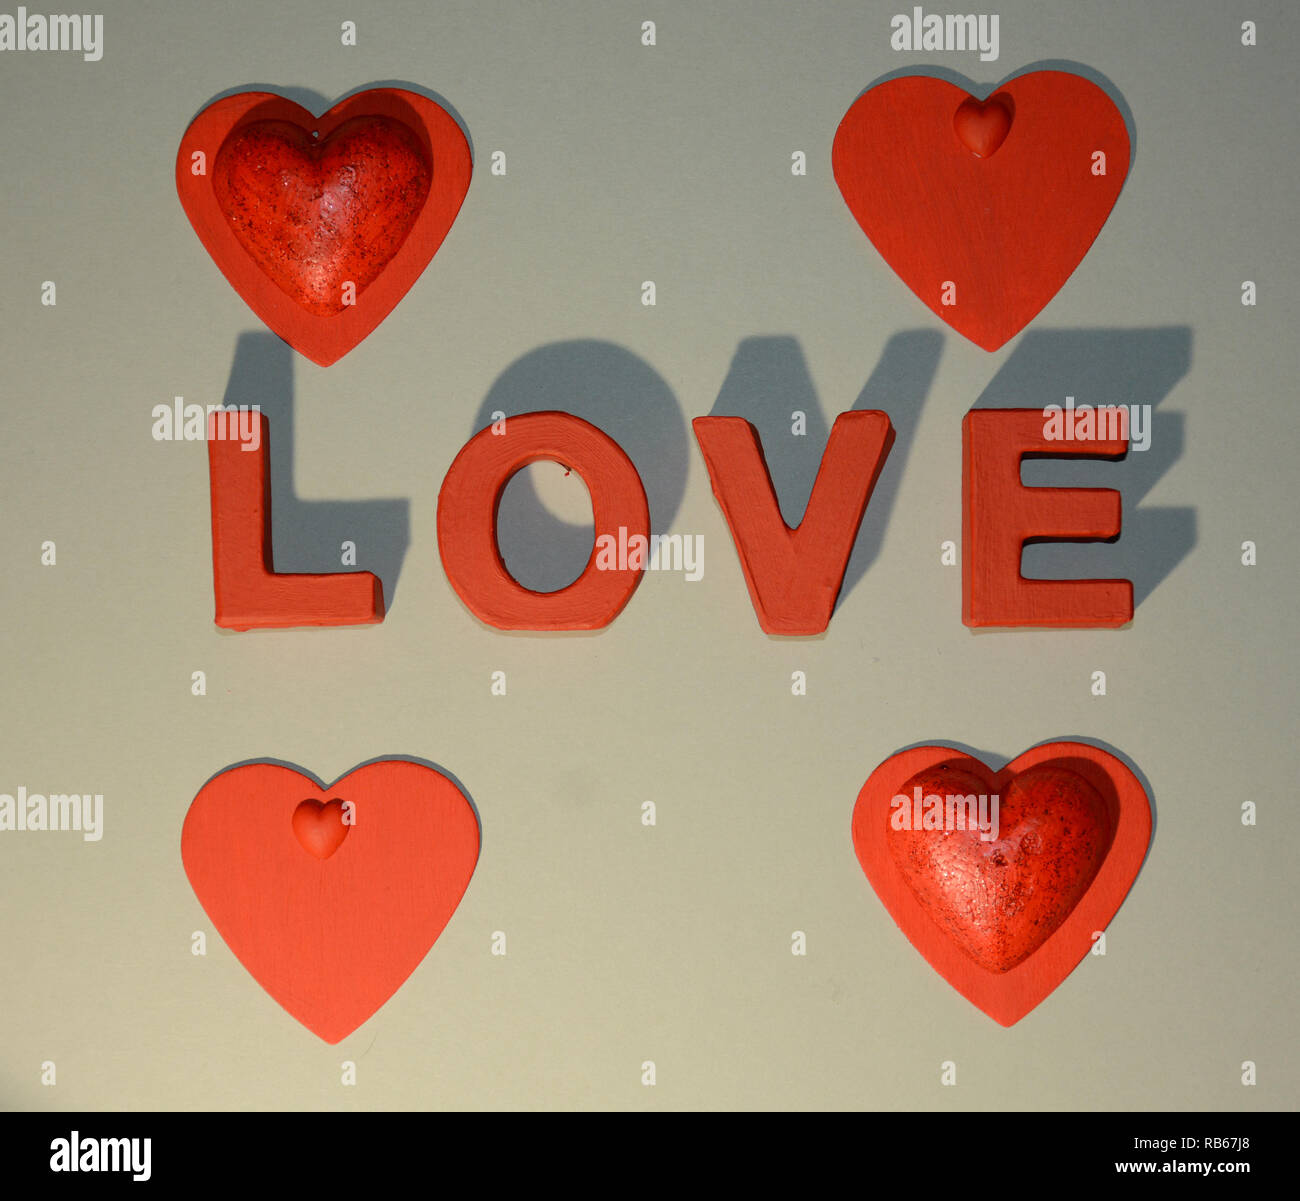 Liebe, Amour, Glitter, Valentinstag Banque D'Images